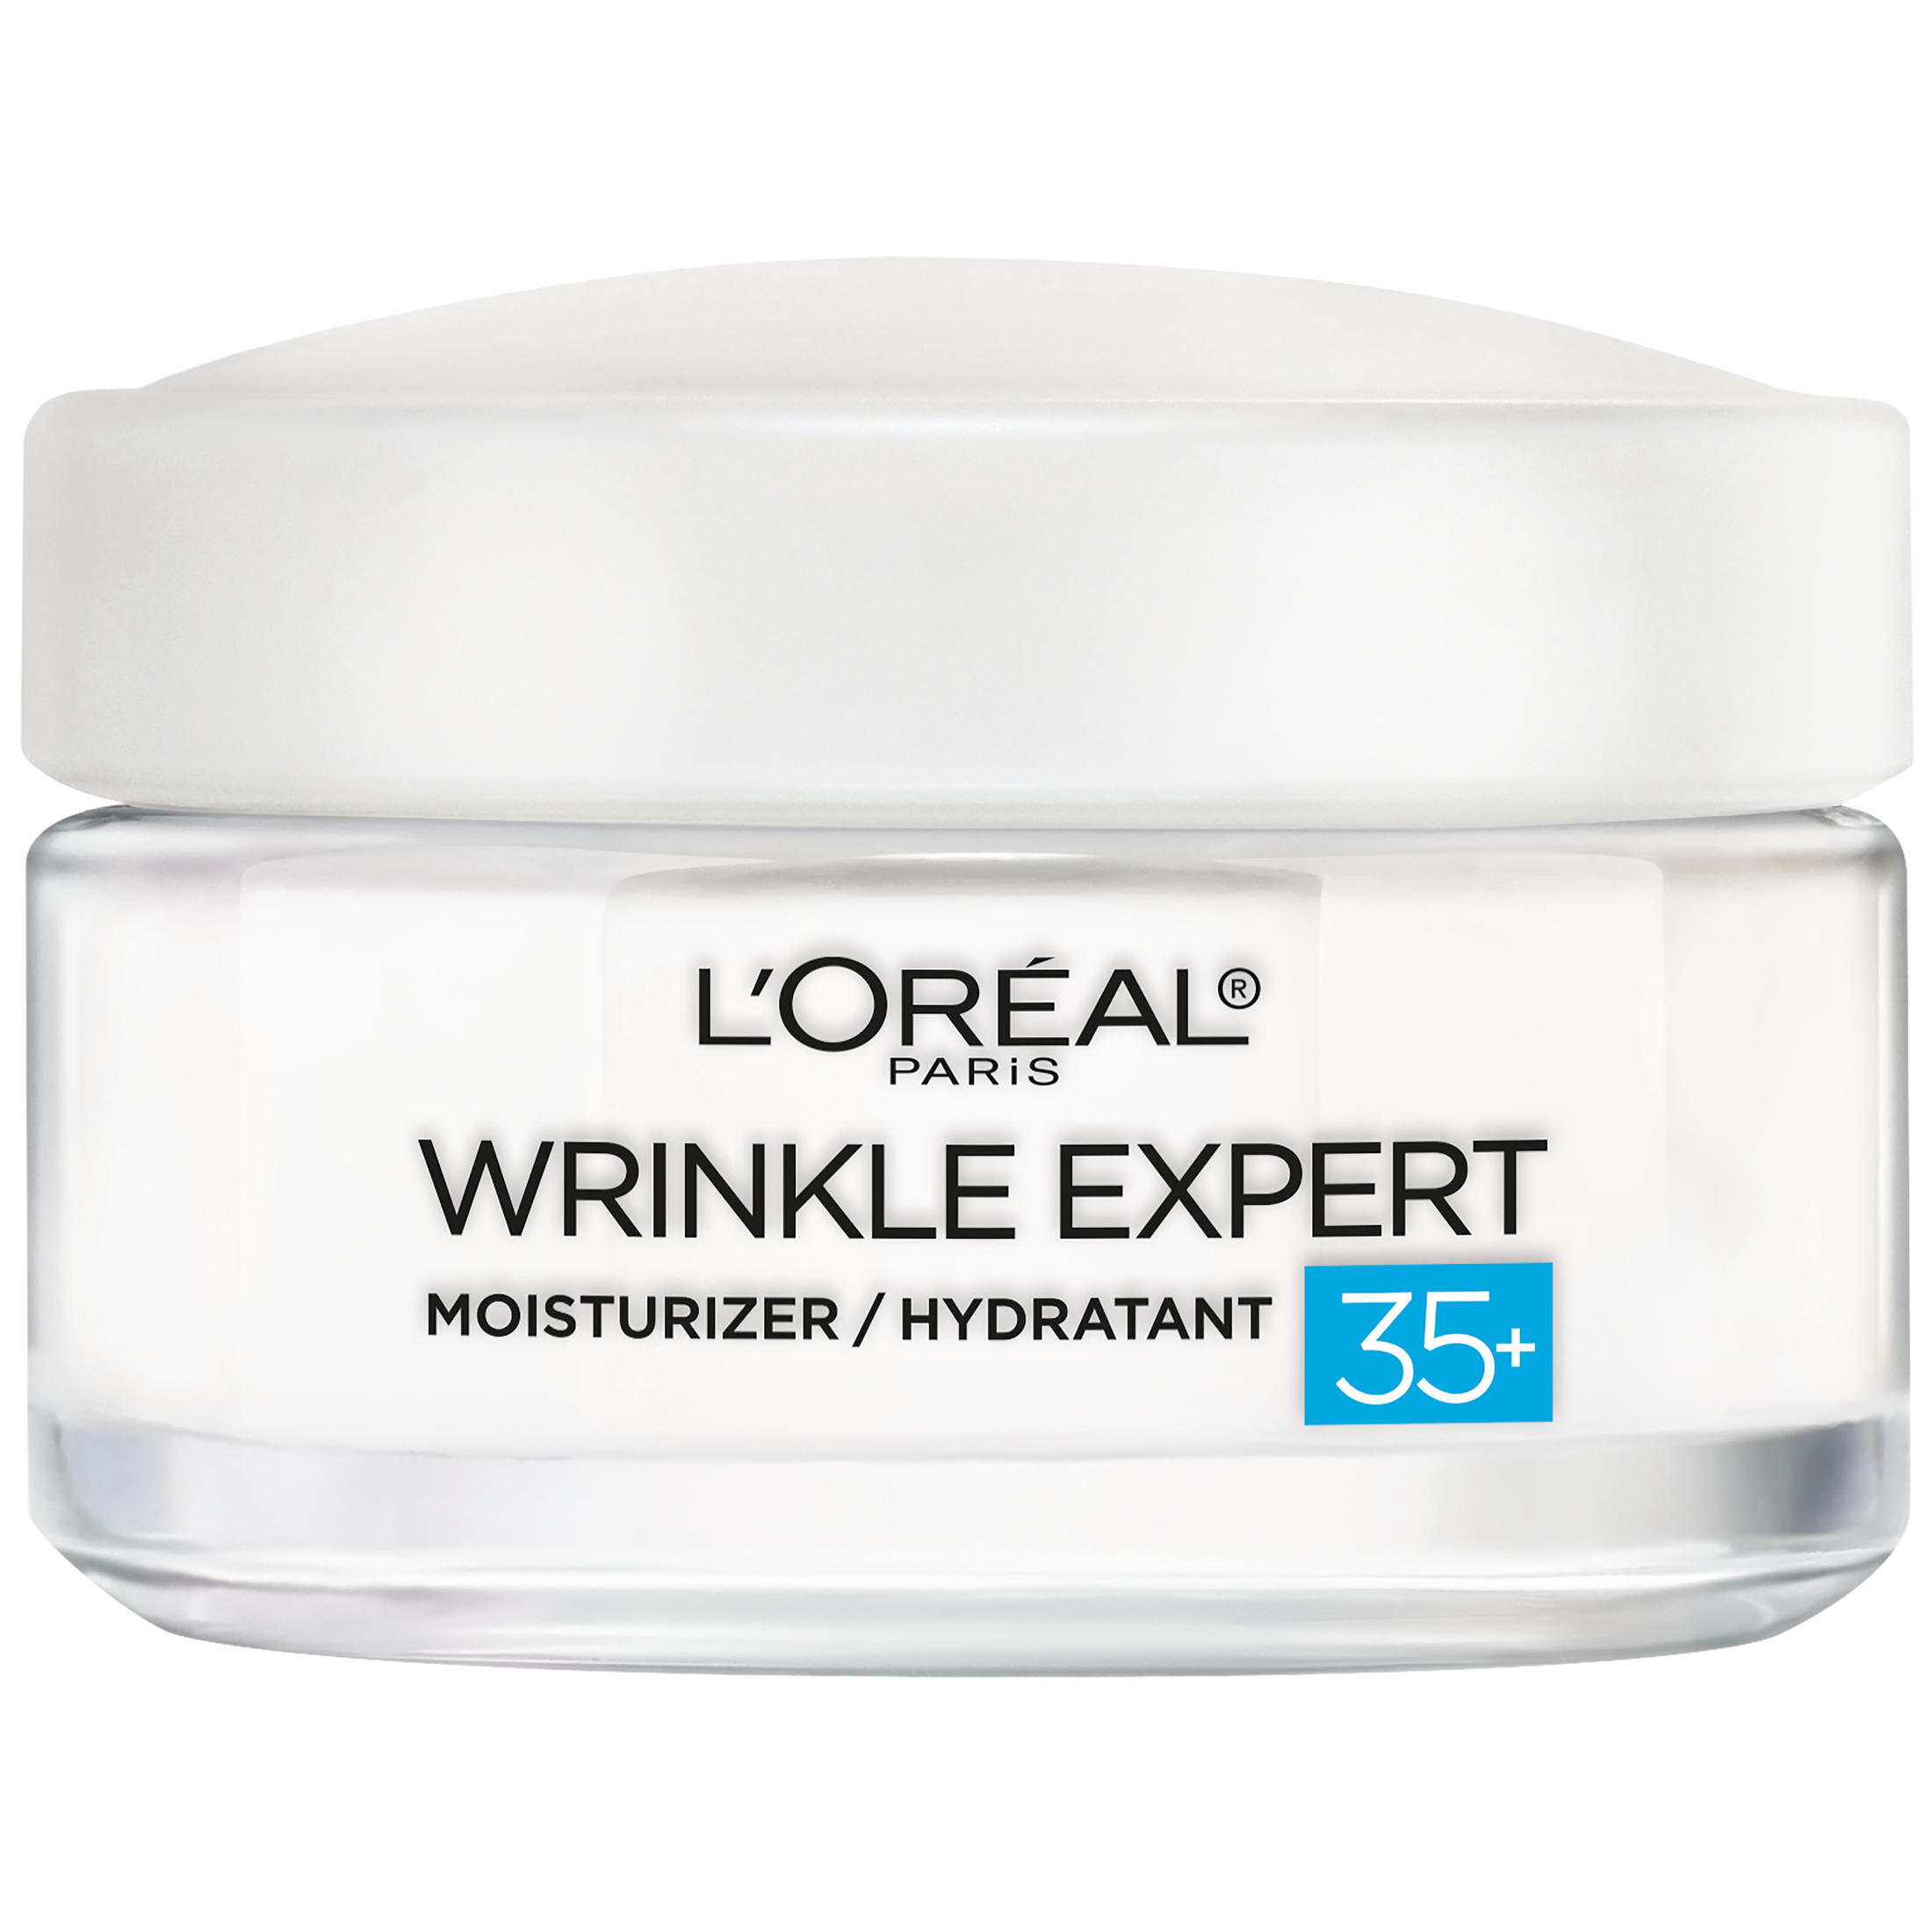 L'Oreal Paris Wrinkle Expert 35+ Day and Night Moisturizer, 1.7 oz - image 1 of 5